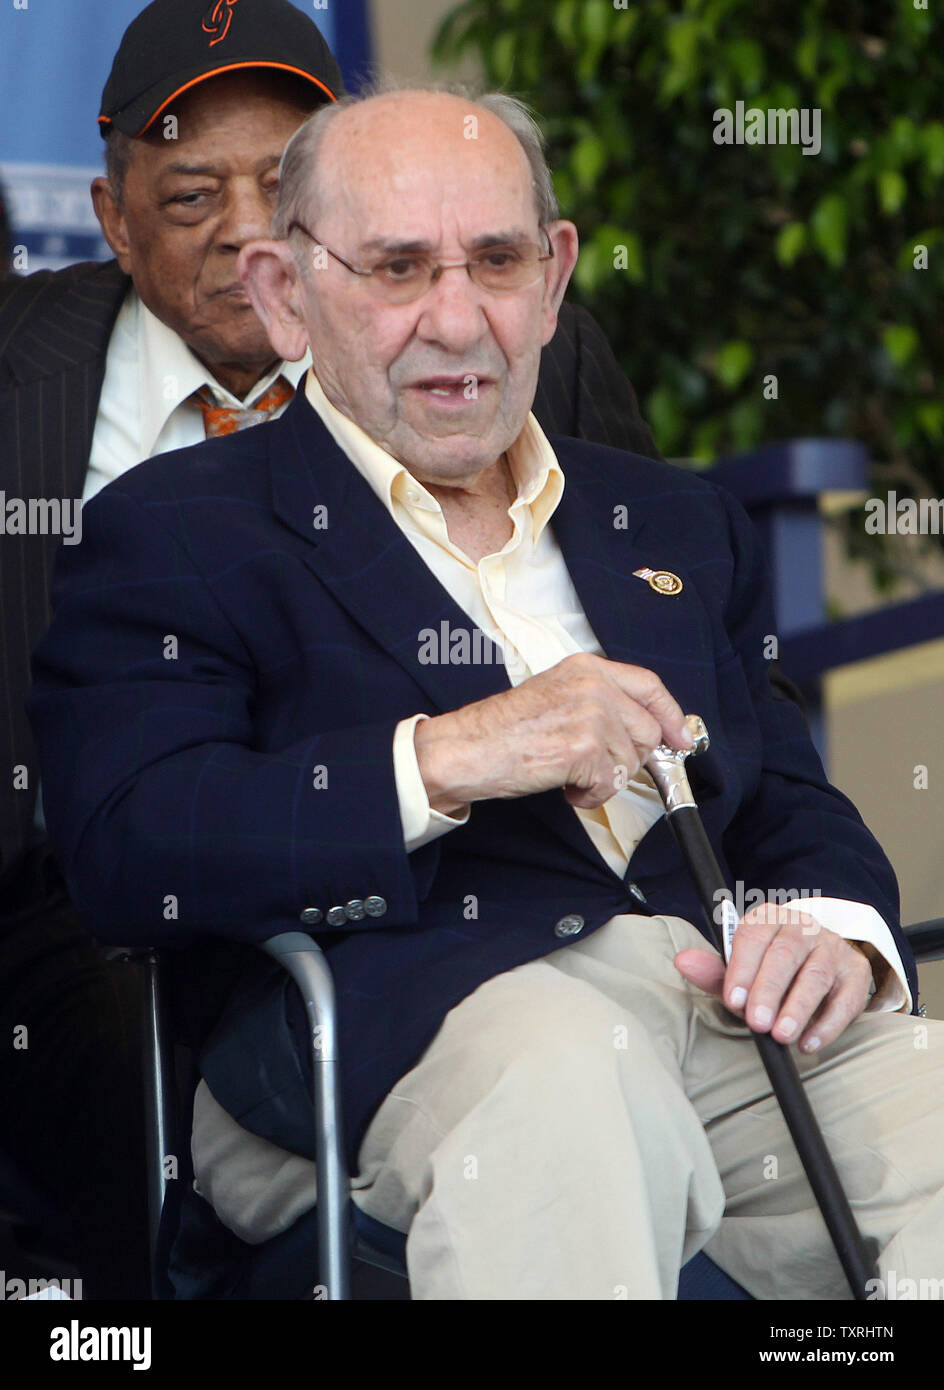 National Baseball Hall of Fame memeber Yogi Berra watches induction ceremonies from the stage in Cooperstown, New York on July 22, 2012. UPI/Bill Greenblatt Stock Photo